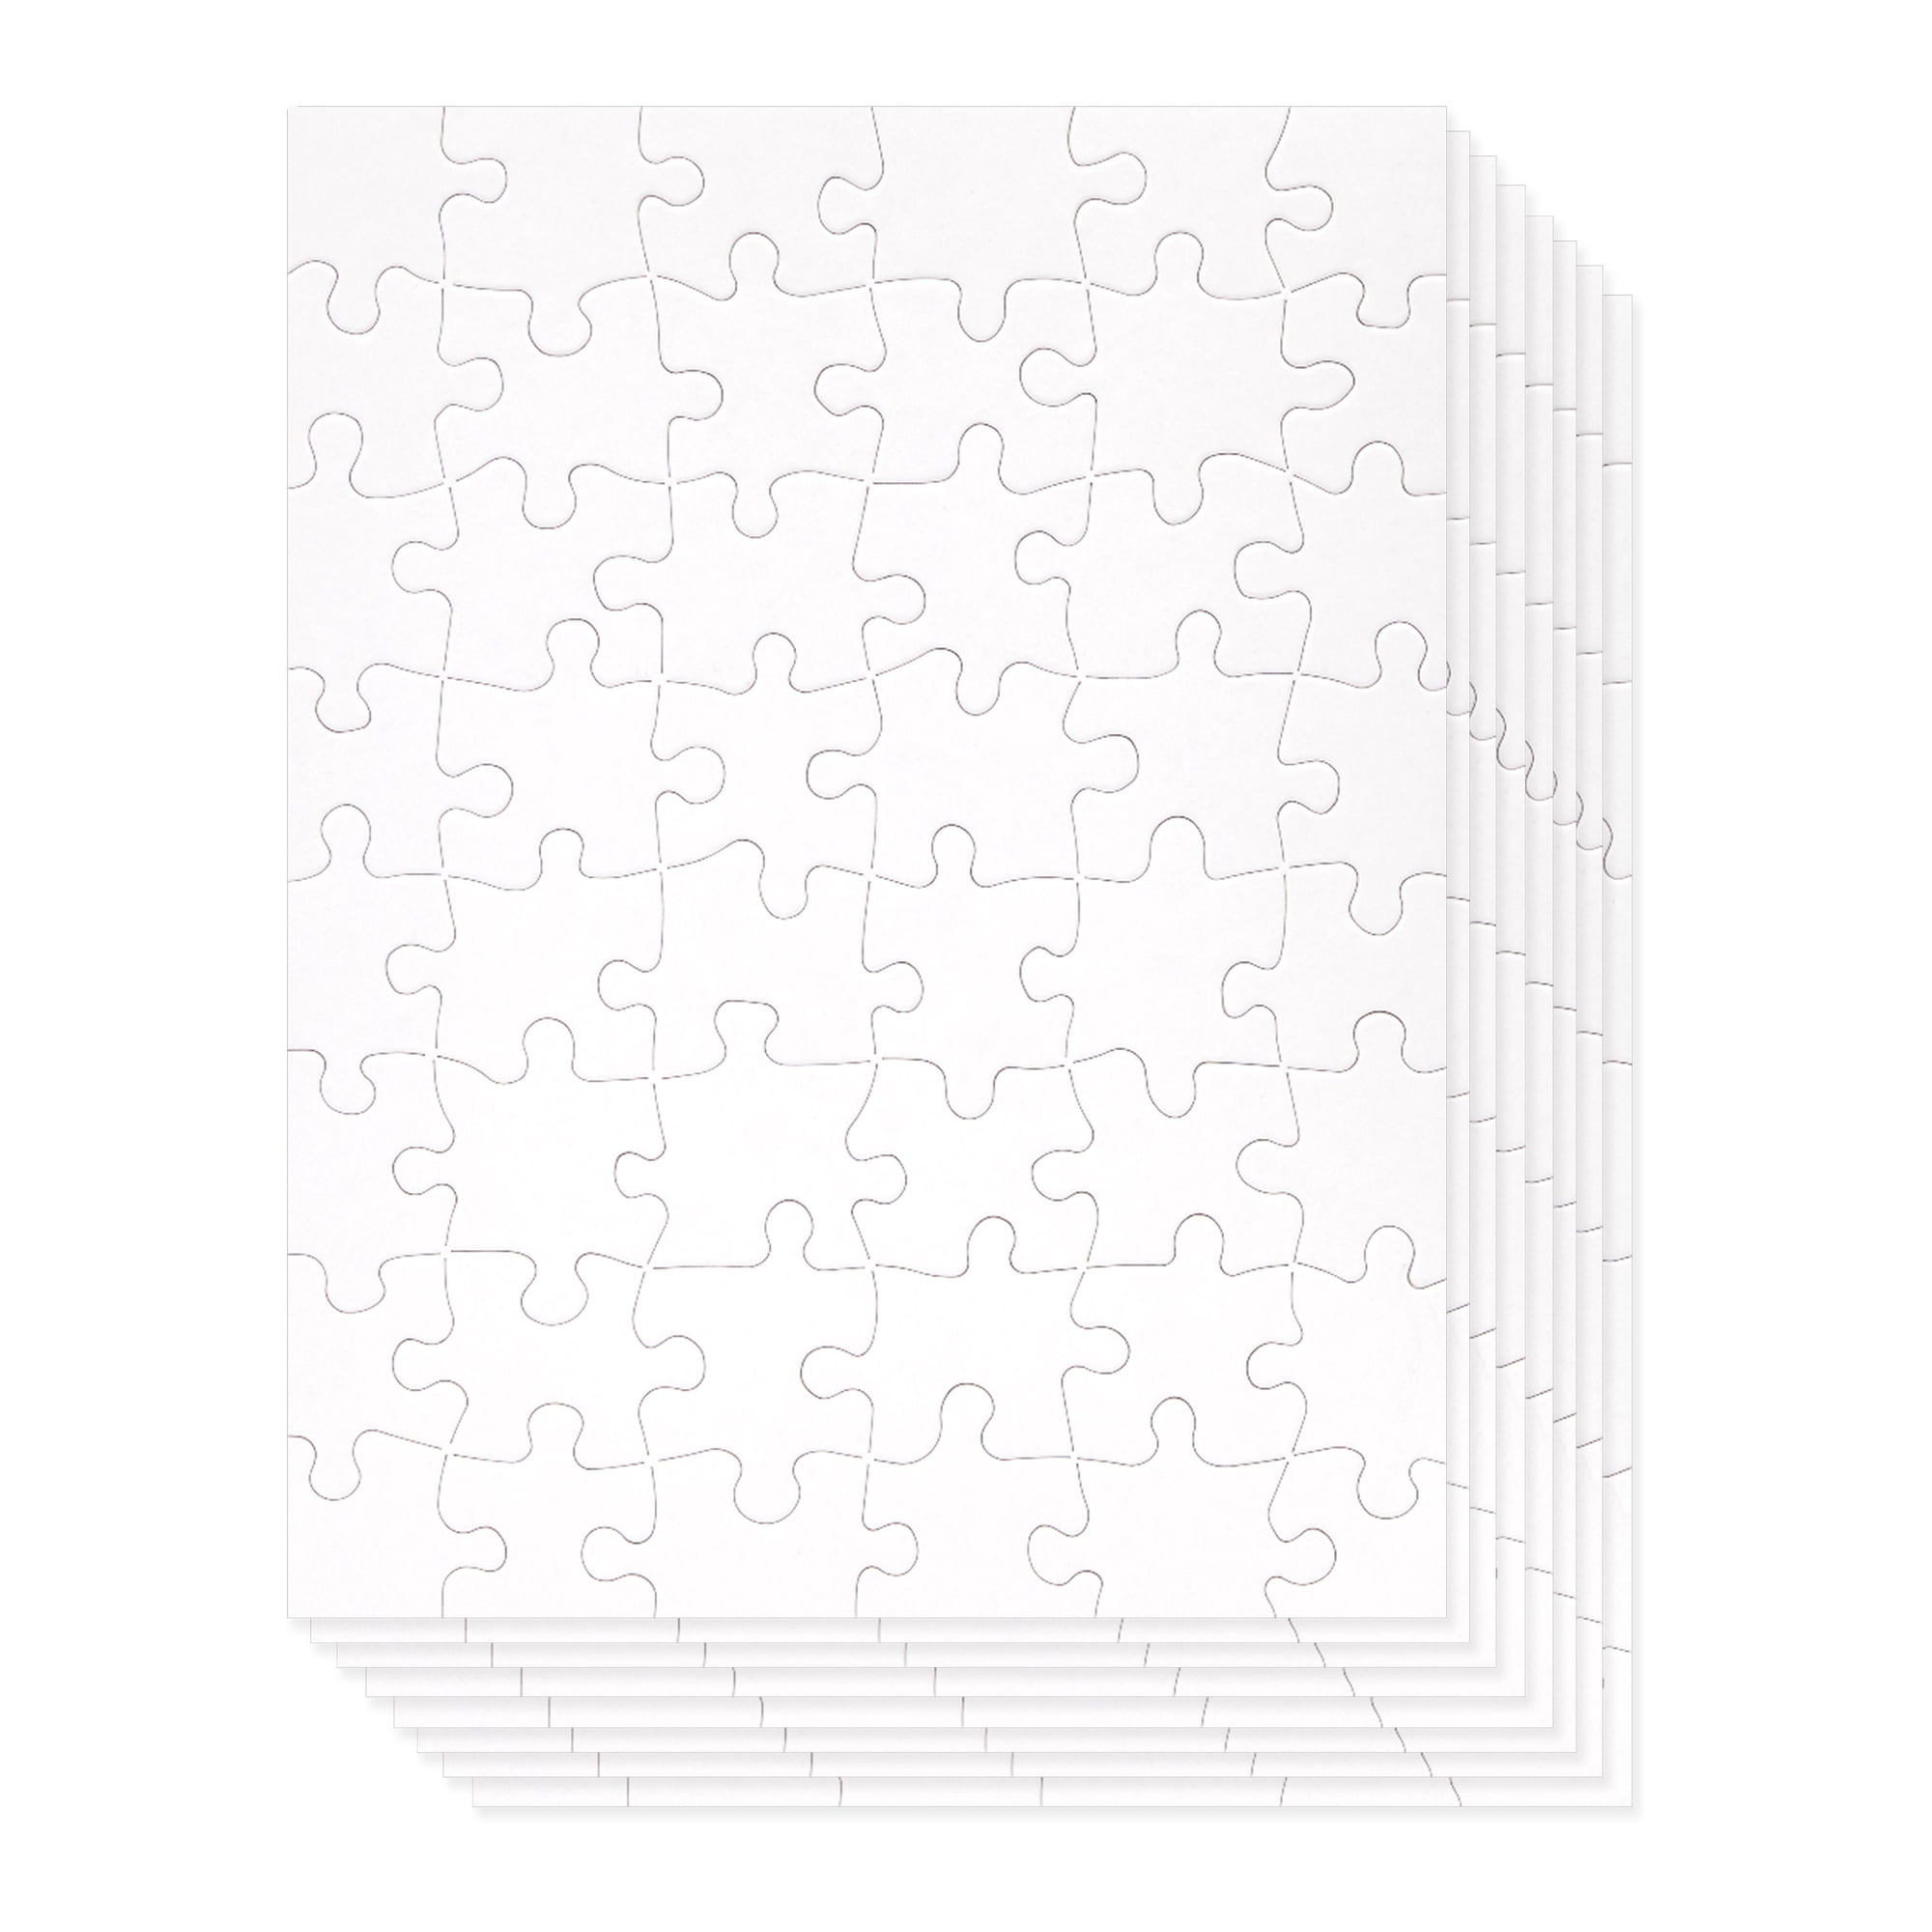  48 Pack Blank Puzzles to Draw On Bulk – Make Your Own